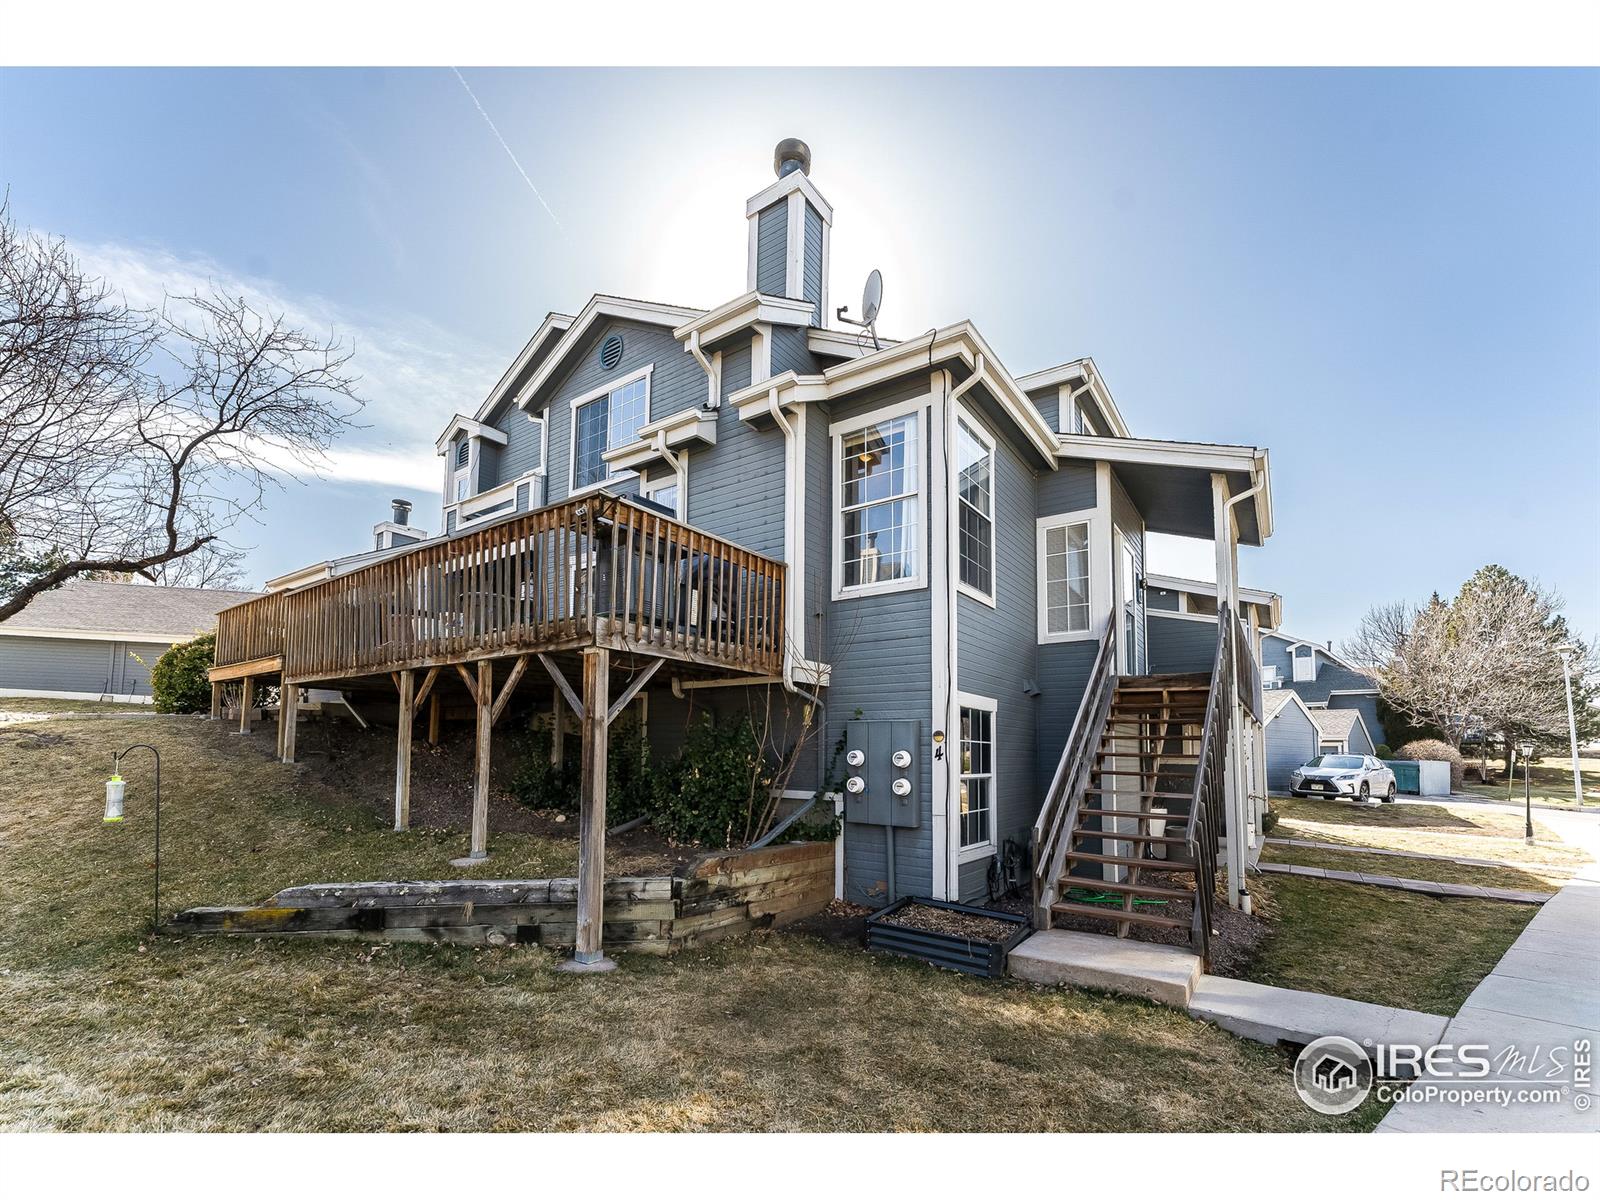 Sold 6880 Xavier Circle, #4, Westminster, CO 80030 4 Beds / 1 Full Bath / 1 3/4 Bath $470,000